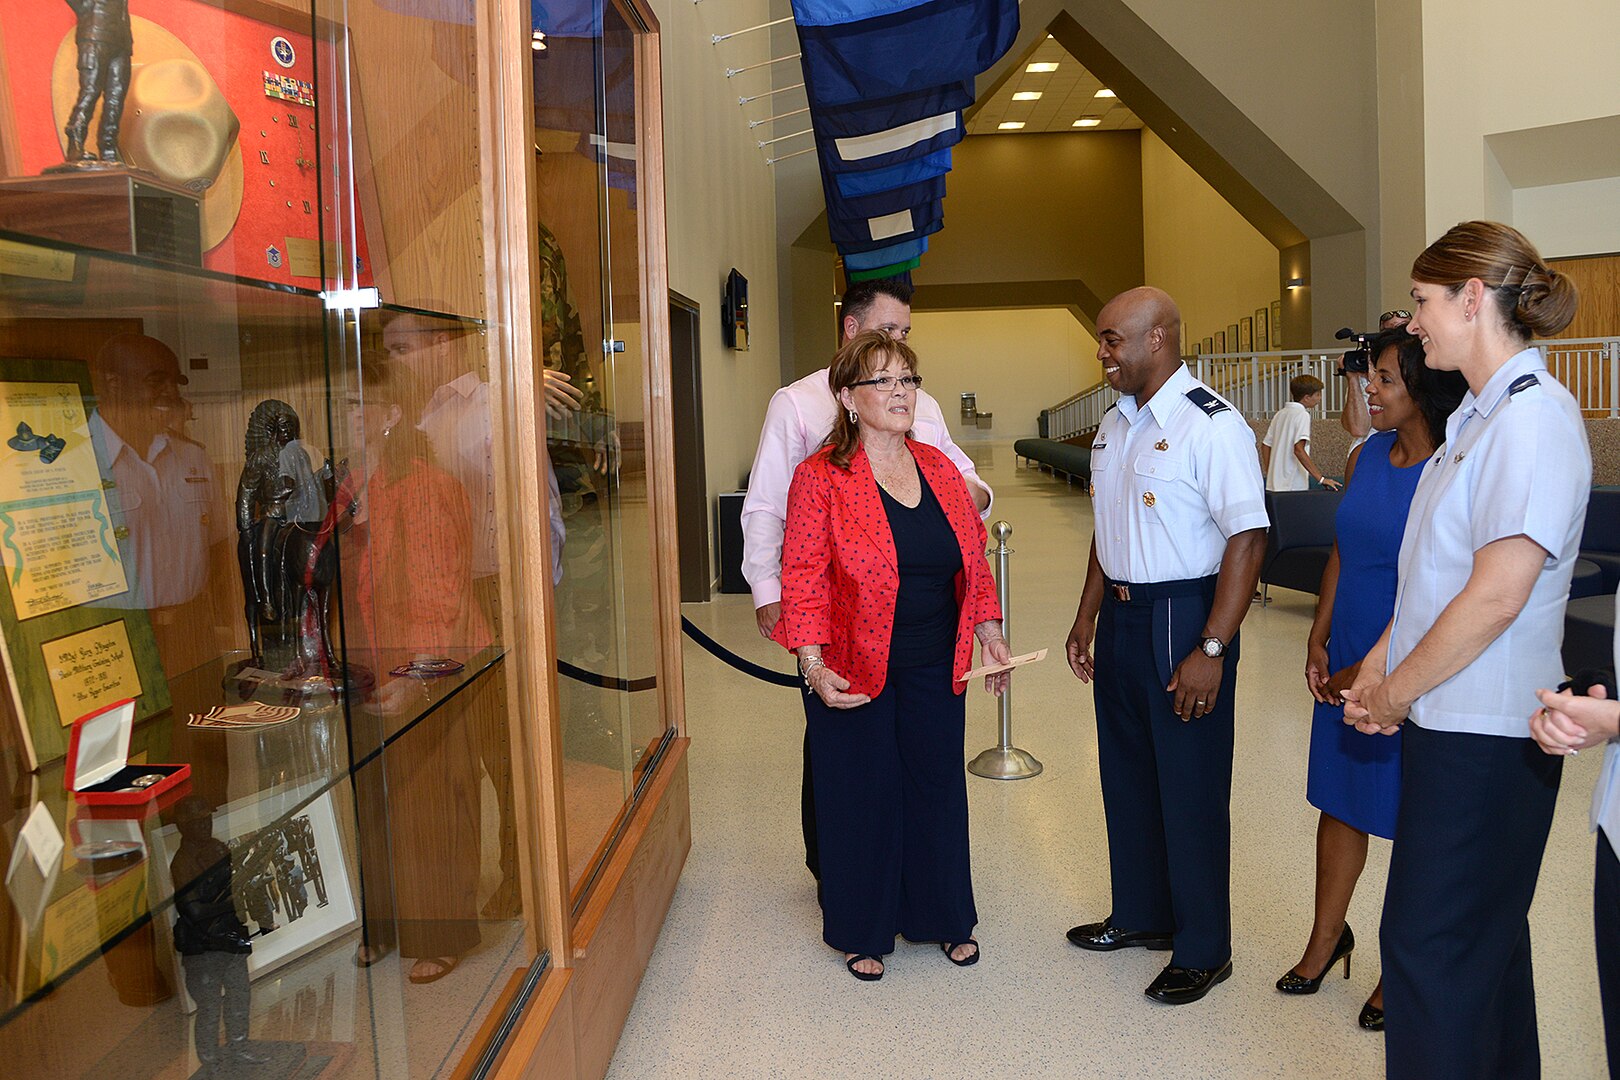 Marsha Pfingston (left) talks to Col. Trent Edwards, 37th Training commander; Edwards’ wife Vanessa; and Col. Michele Edmondson, 737th Training Group commander, about the exhibit in the new Recruit/Family In-processing and Information Center at Joint Base San Antonio-Lackland, Texas July 30, 2014 that honors her late husband, 10th Chief Master Sergeant of the Air Force Gary Pfingston. (U.S. Air Force Photo by Benjamin Faske/Released)